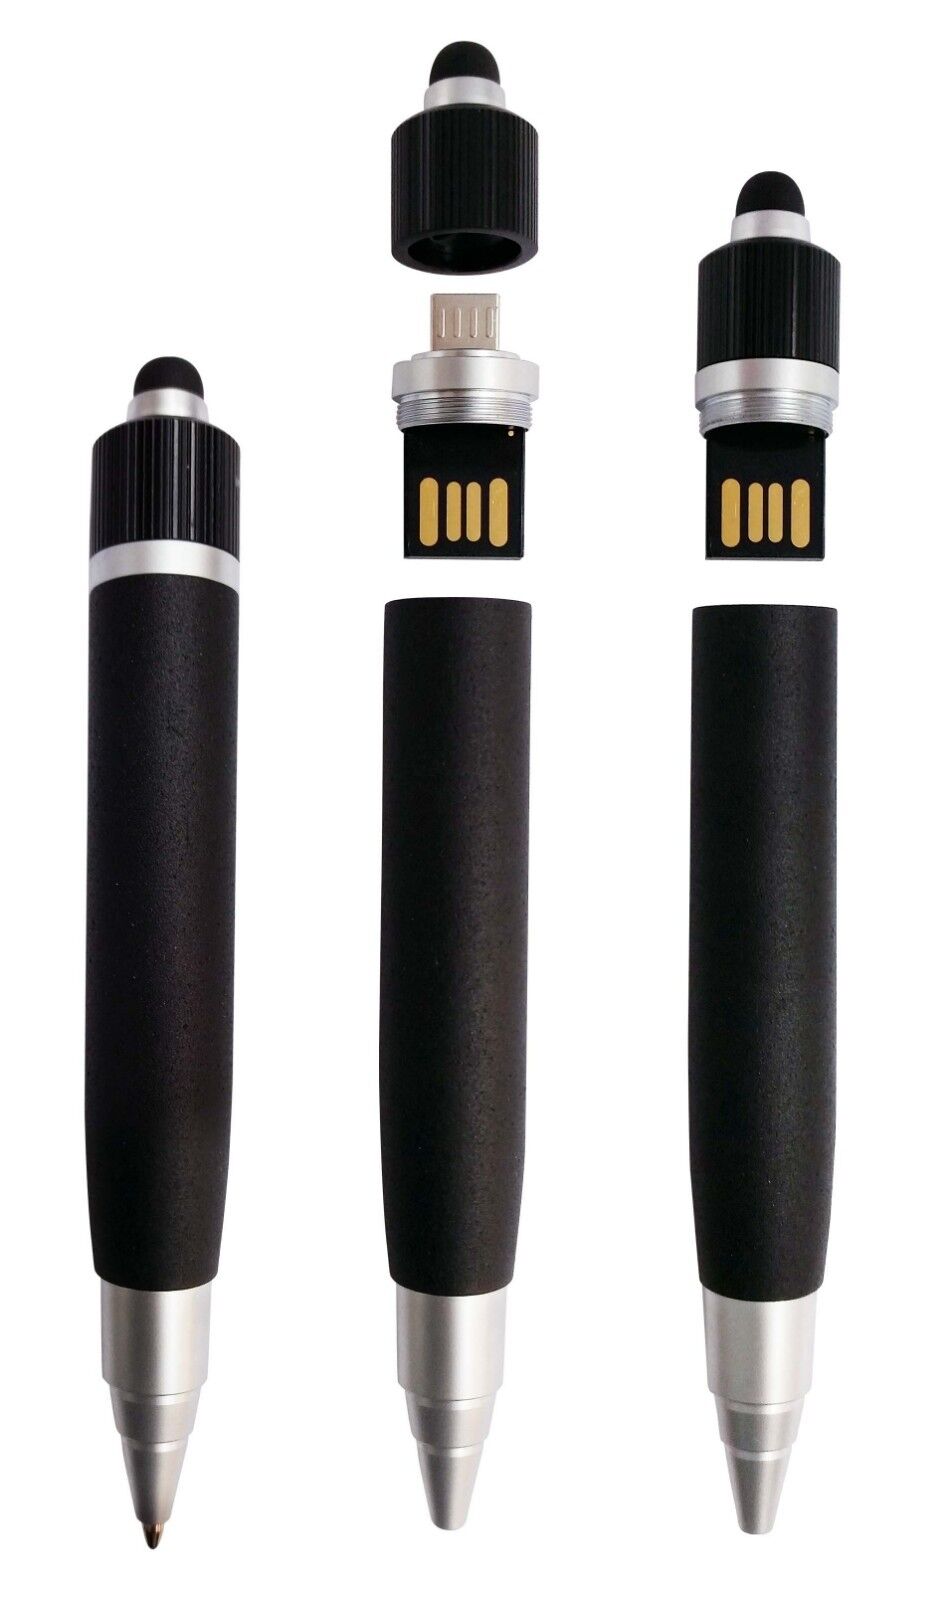 Multifunction OTG USB (8GB) Pen for Android Device and Computer